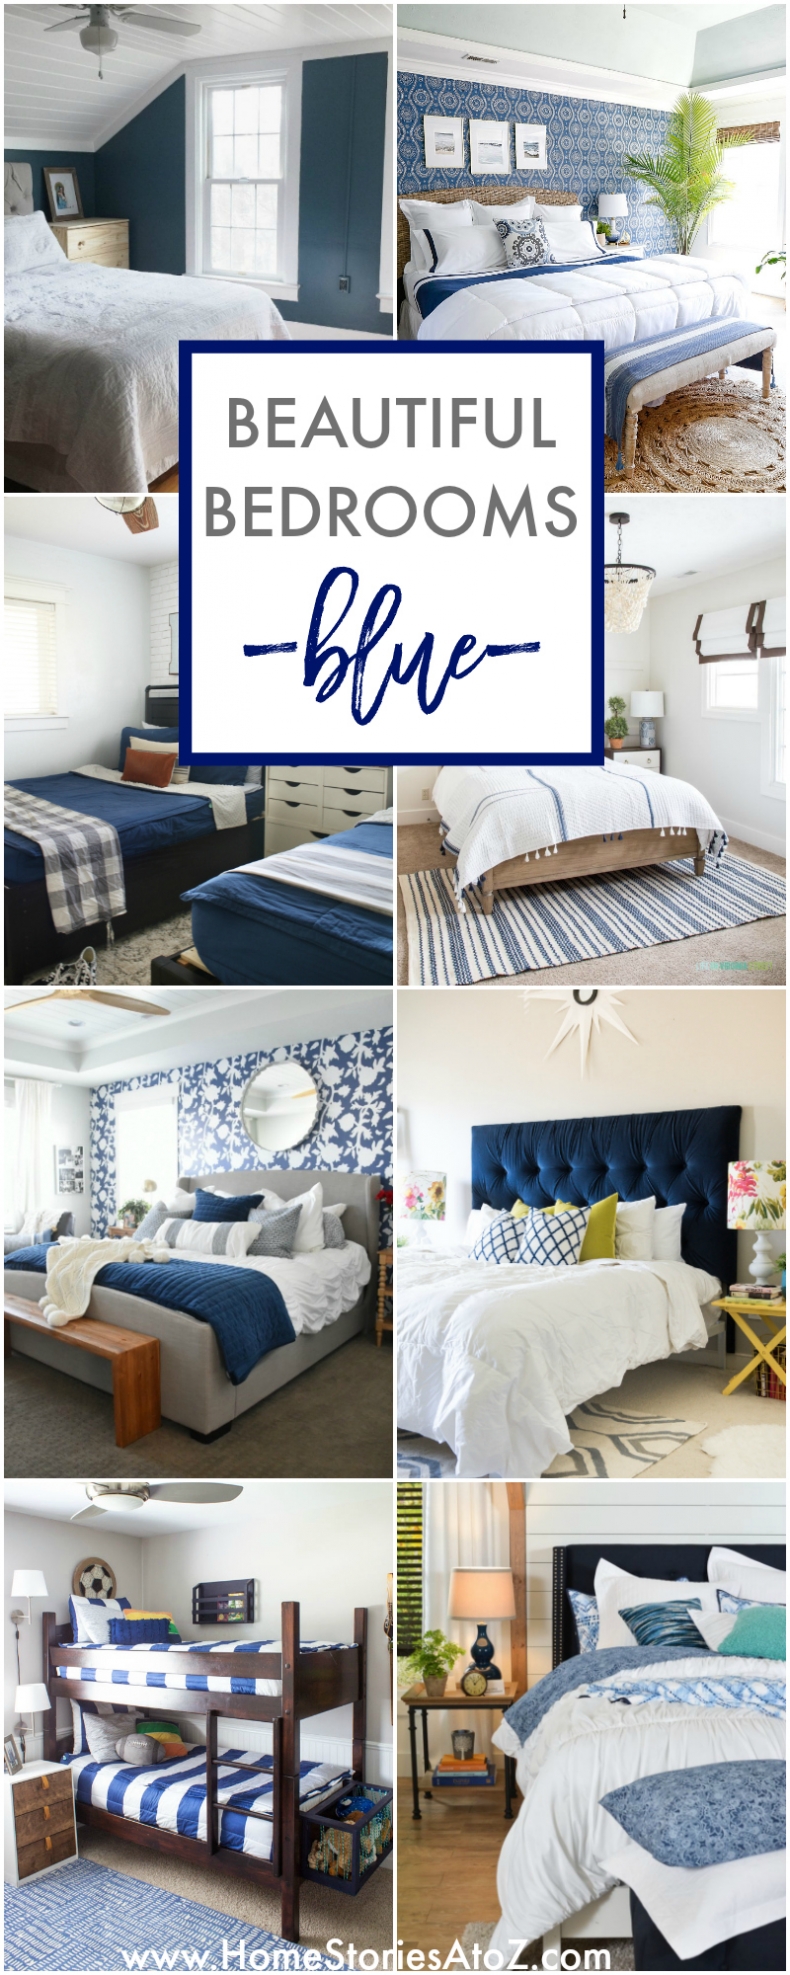 BEAUTIFUL BLUE BEDROOM DECOR IDEAS | Home Stories A to Z